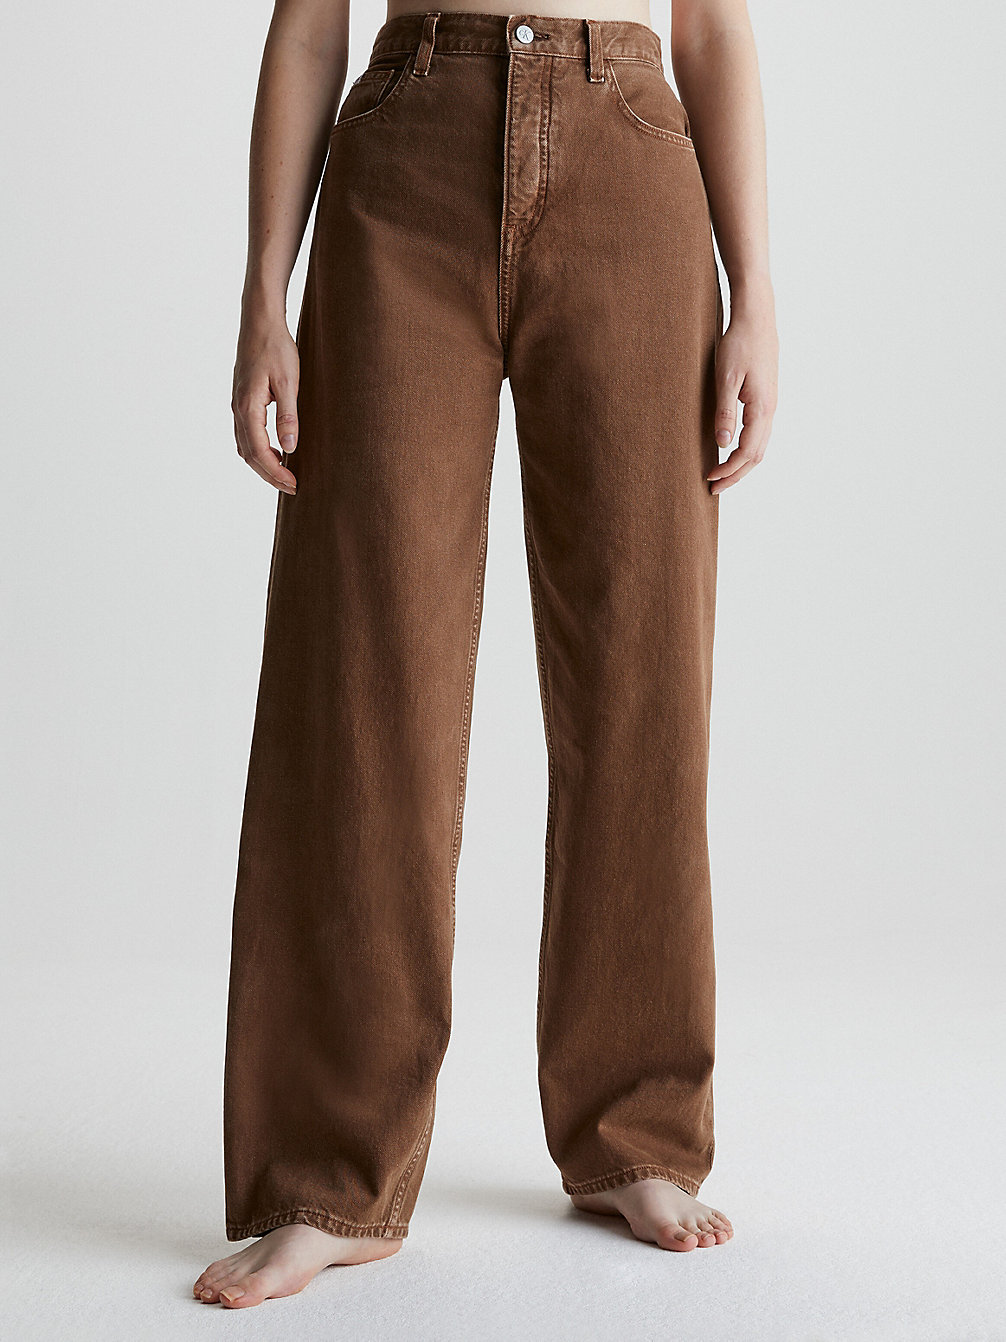 High Rise Relaxed Jeans > BISON > undefined donna > Calvin Klein